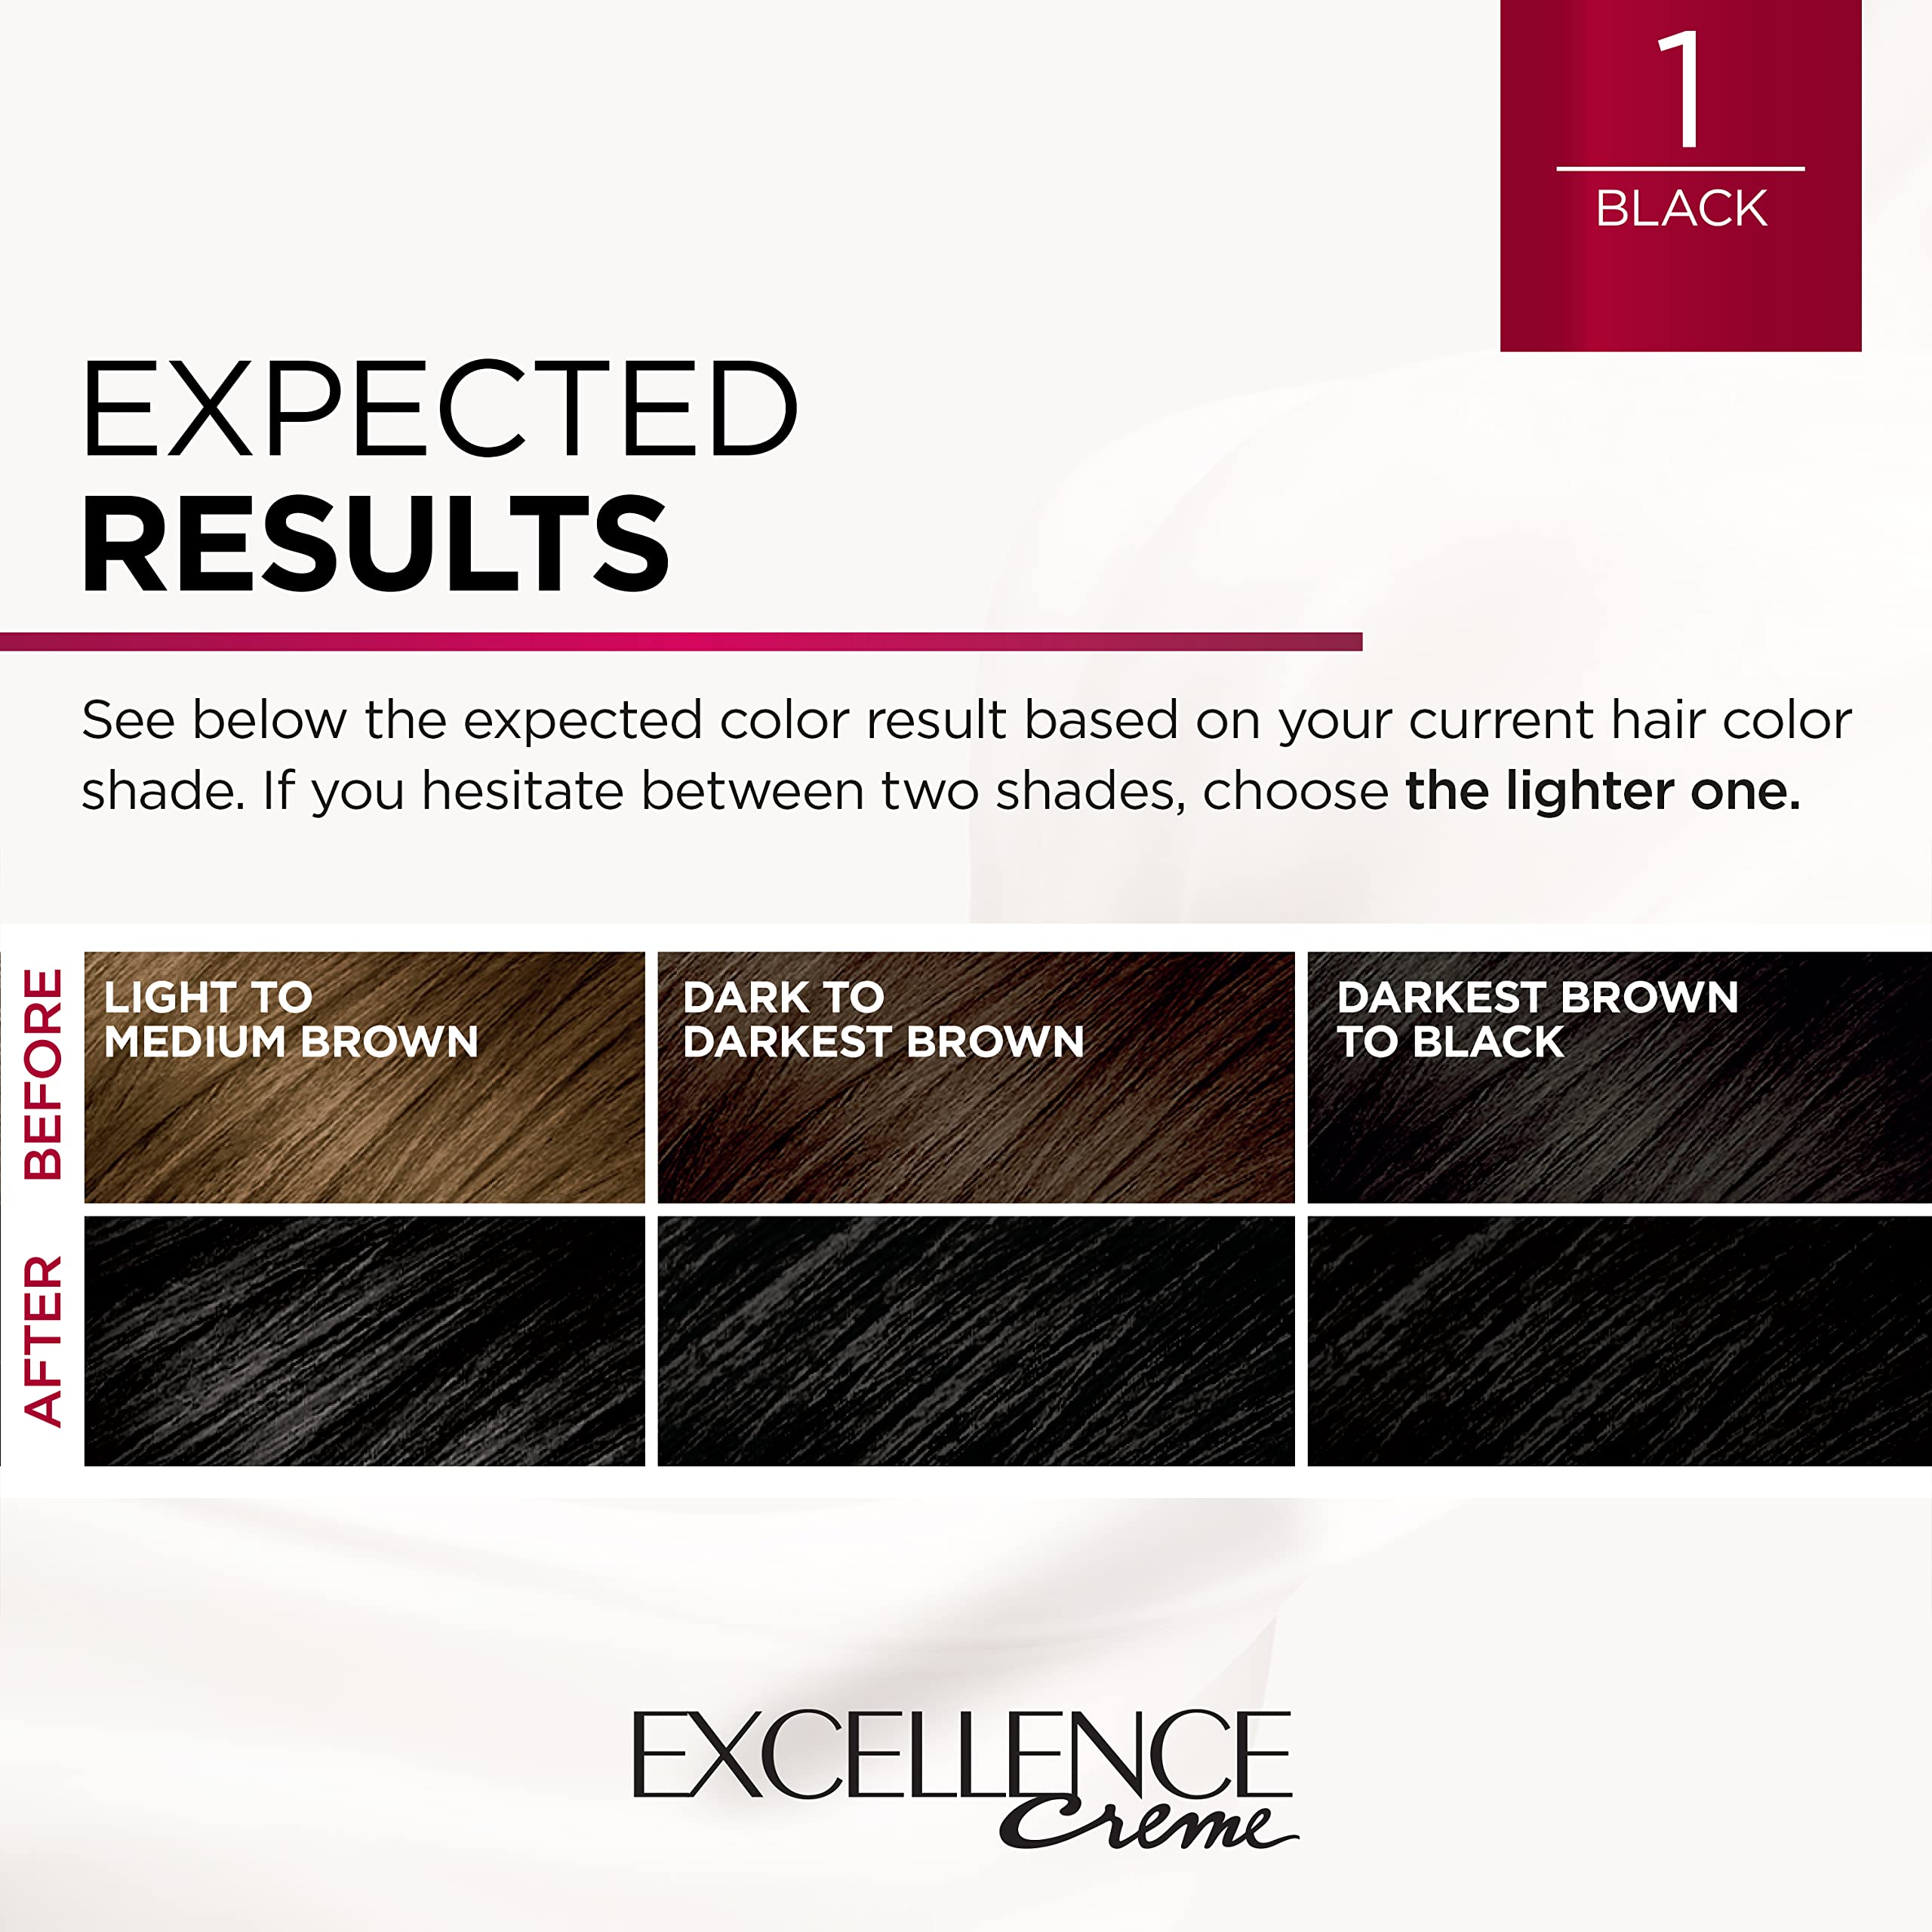 L'Oreal Paris Excellence Creme Permanent Triple Care Hair Color, 1 Black, Gray Coverage For Up to 8 Weeks, All Hair Types, Pack of 1